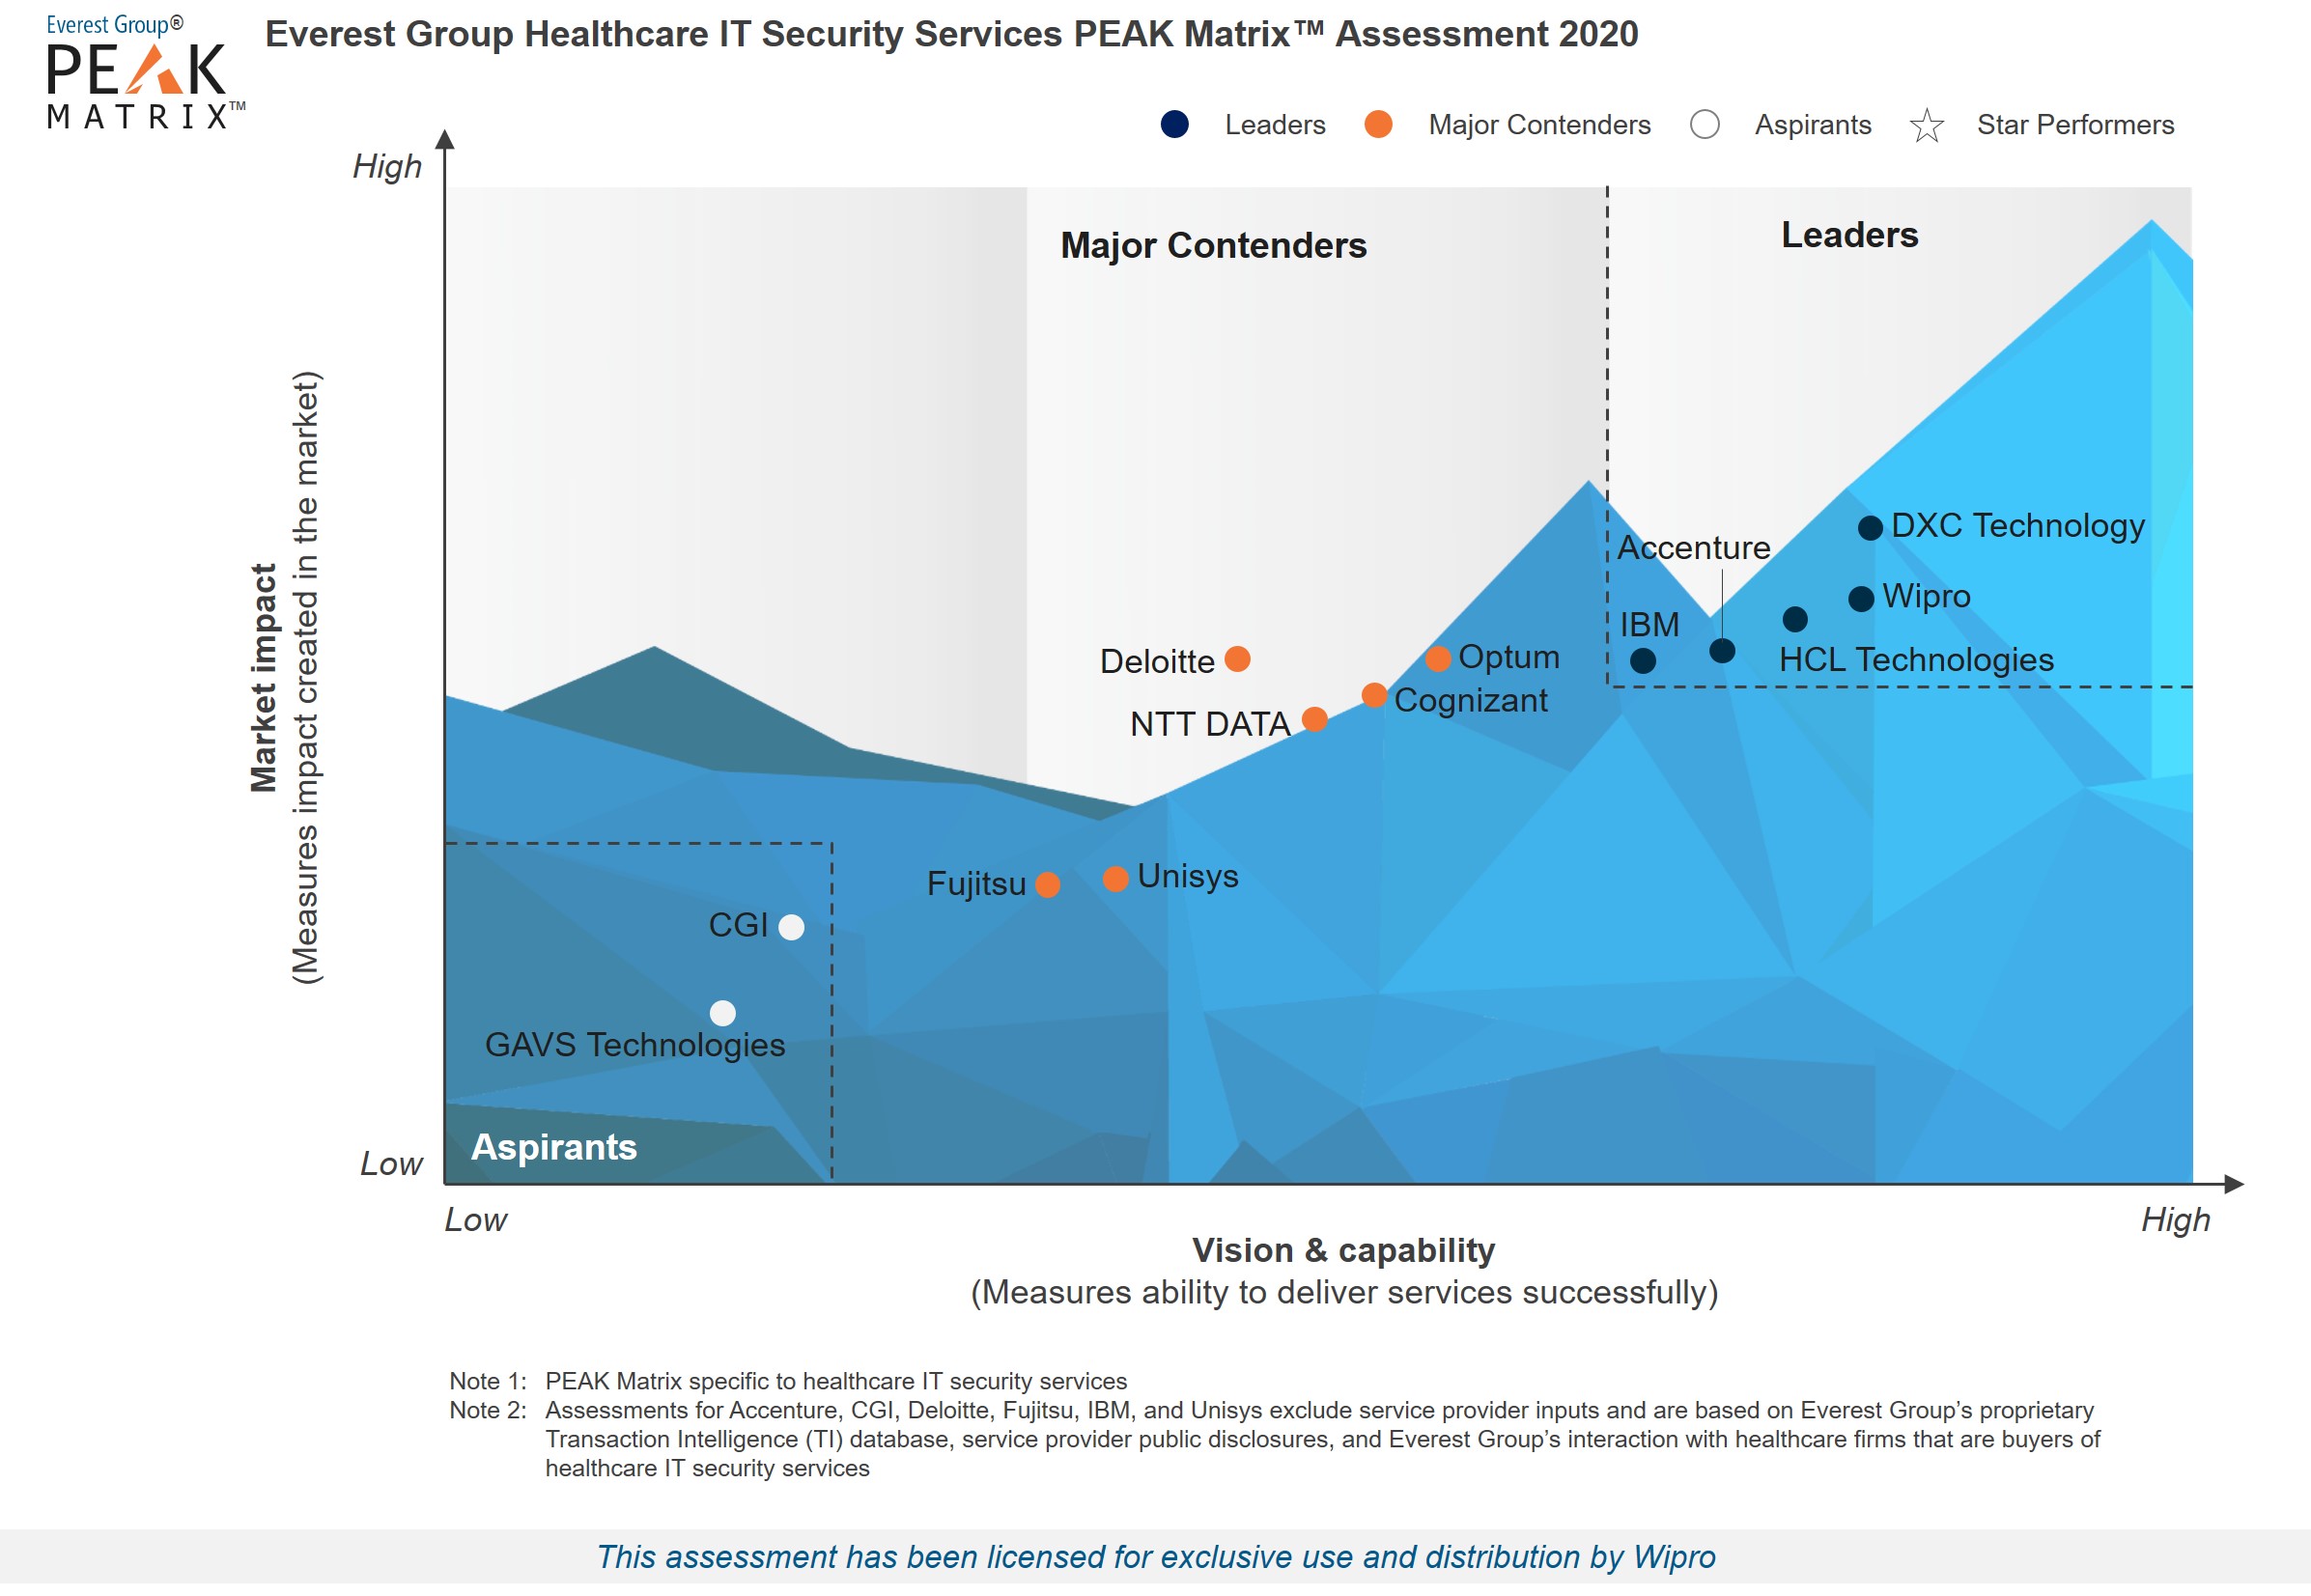 Wipro Positioned as a Leader in Everest Group PEAK Matrix Assessment 2020